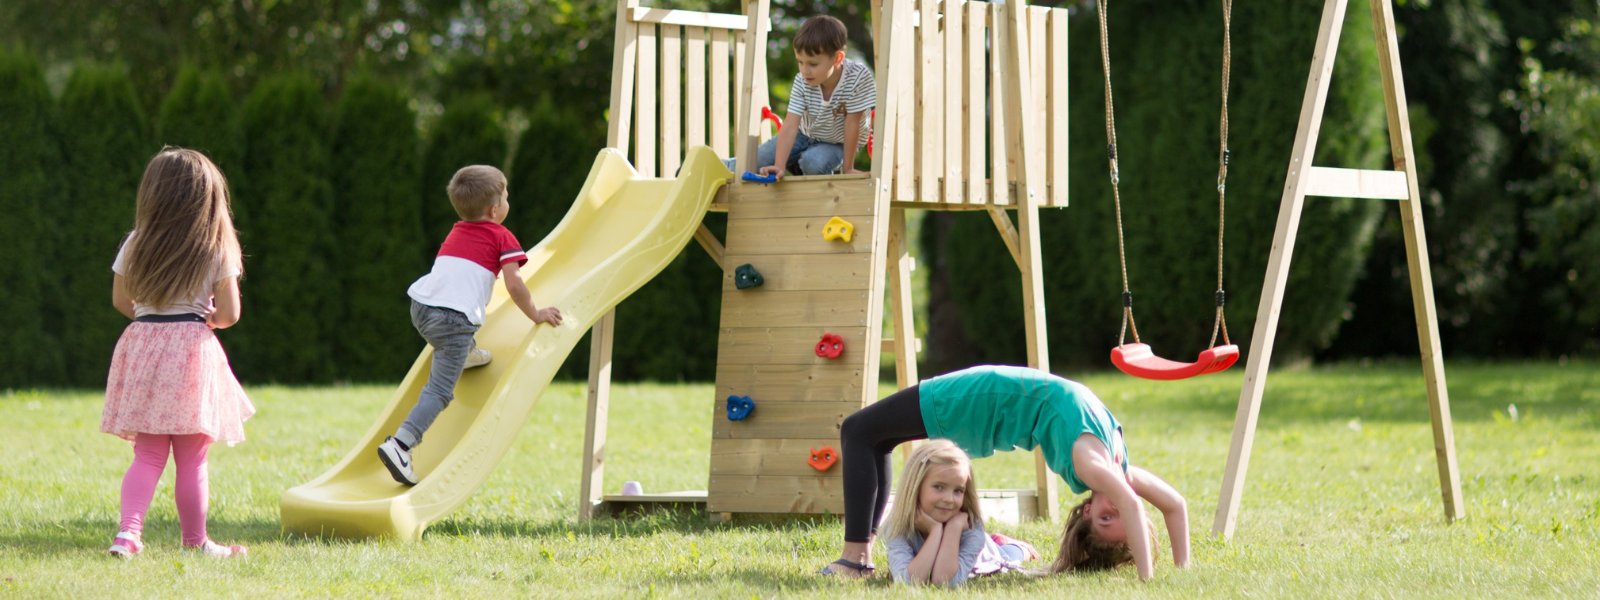 Children outdoor Playgrounds with swing, slide, climbing frame